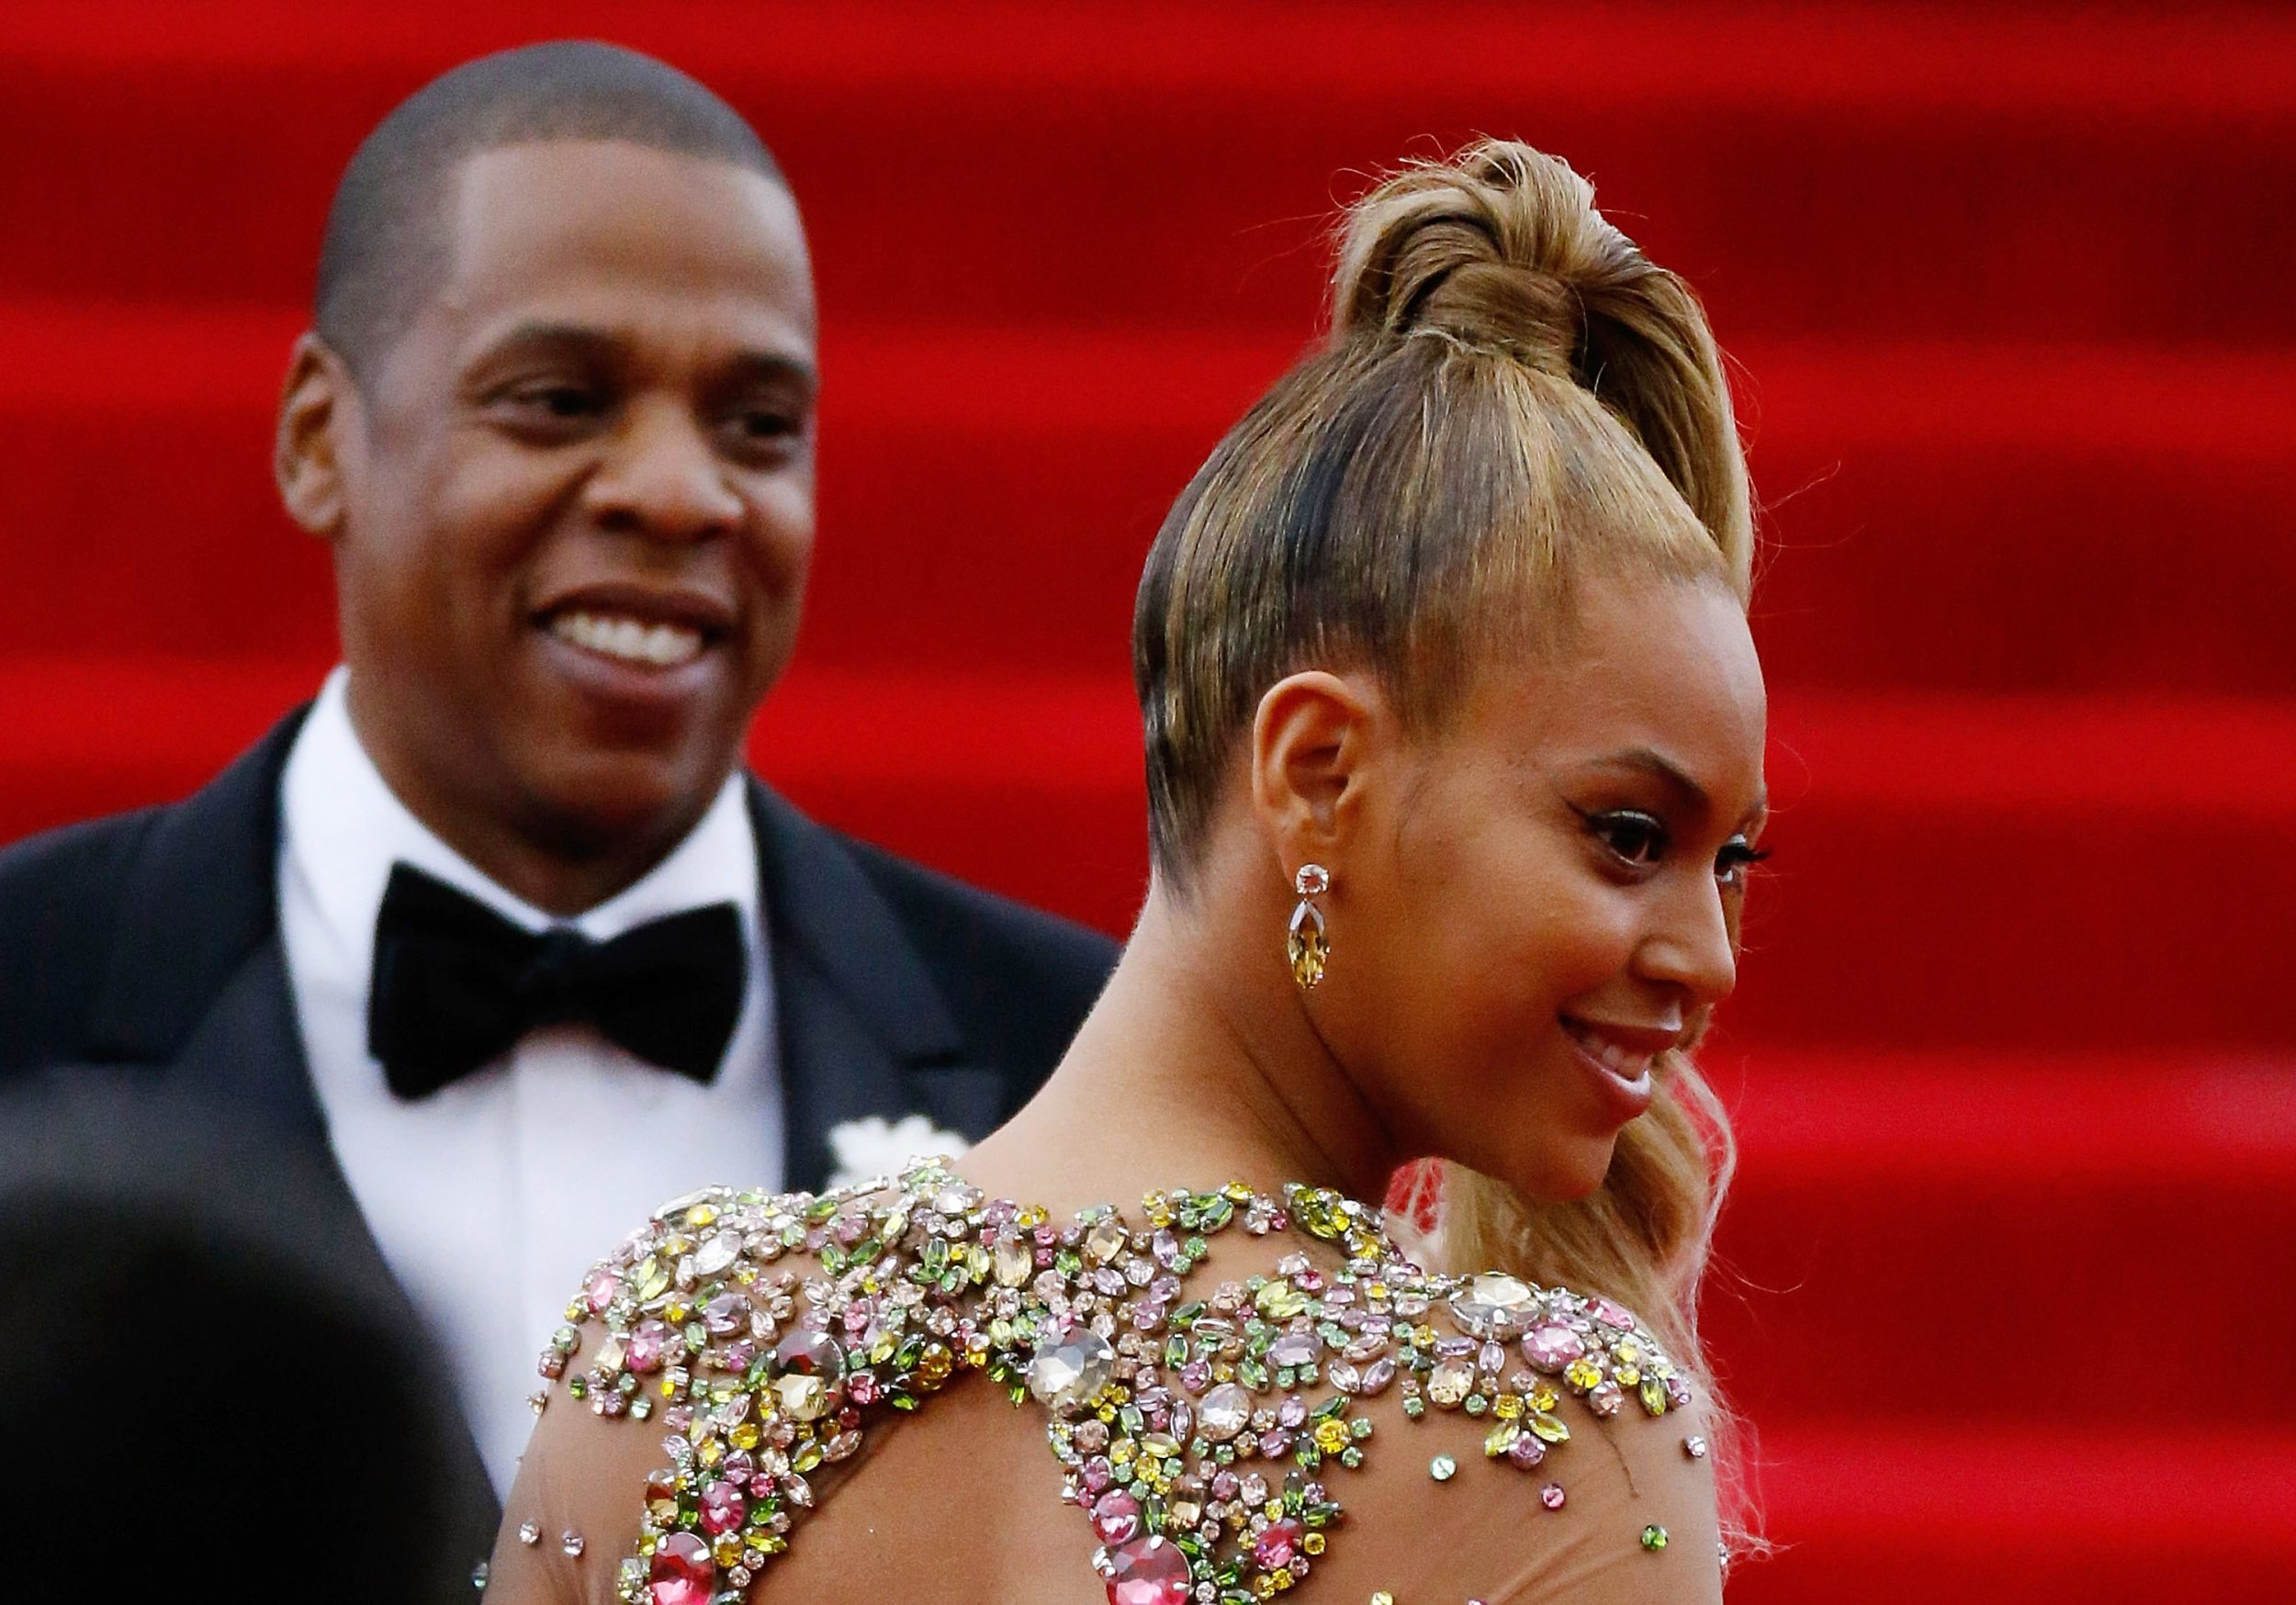 Did Beyoncé And Jay Z Remove Matching Tattoos Amid Cheating Rumors? Report  Says Their Tattoos Are Lighter Now